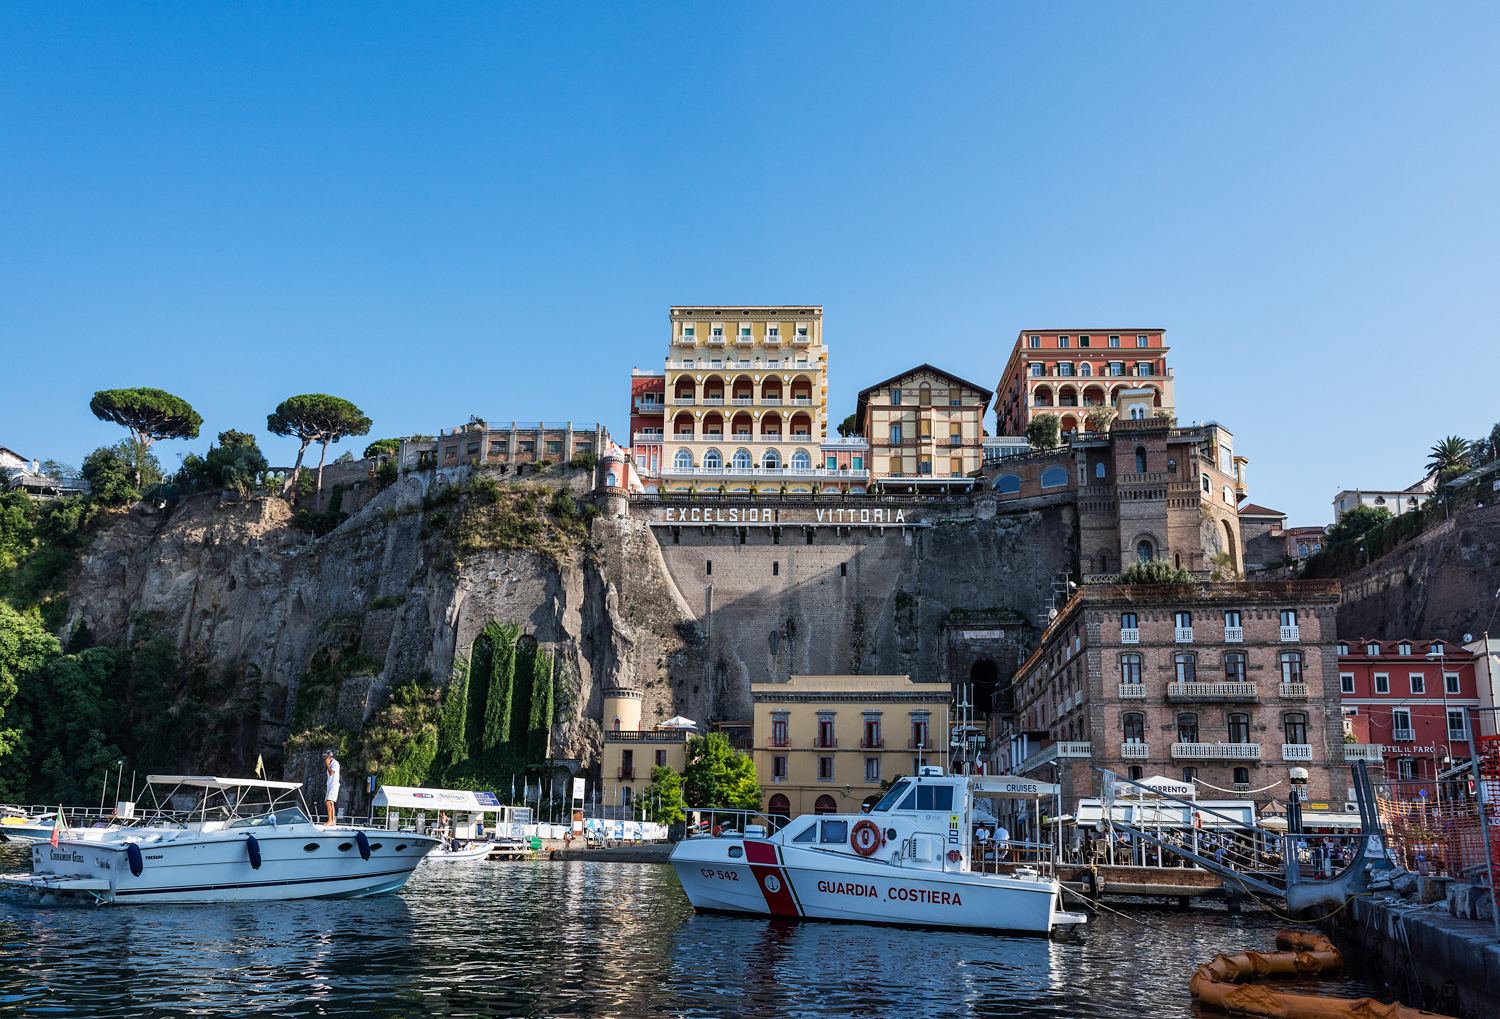 The town of Sorrento sits atop cliffs overlooking the Bay of Naples. Image by John Greim / LightRocket / Getty